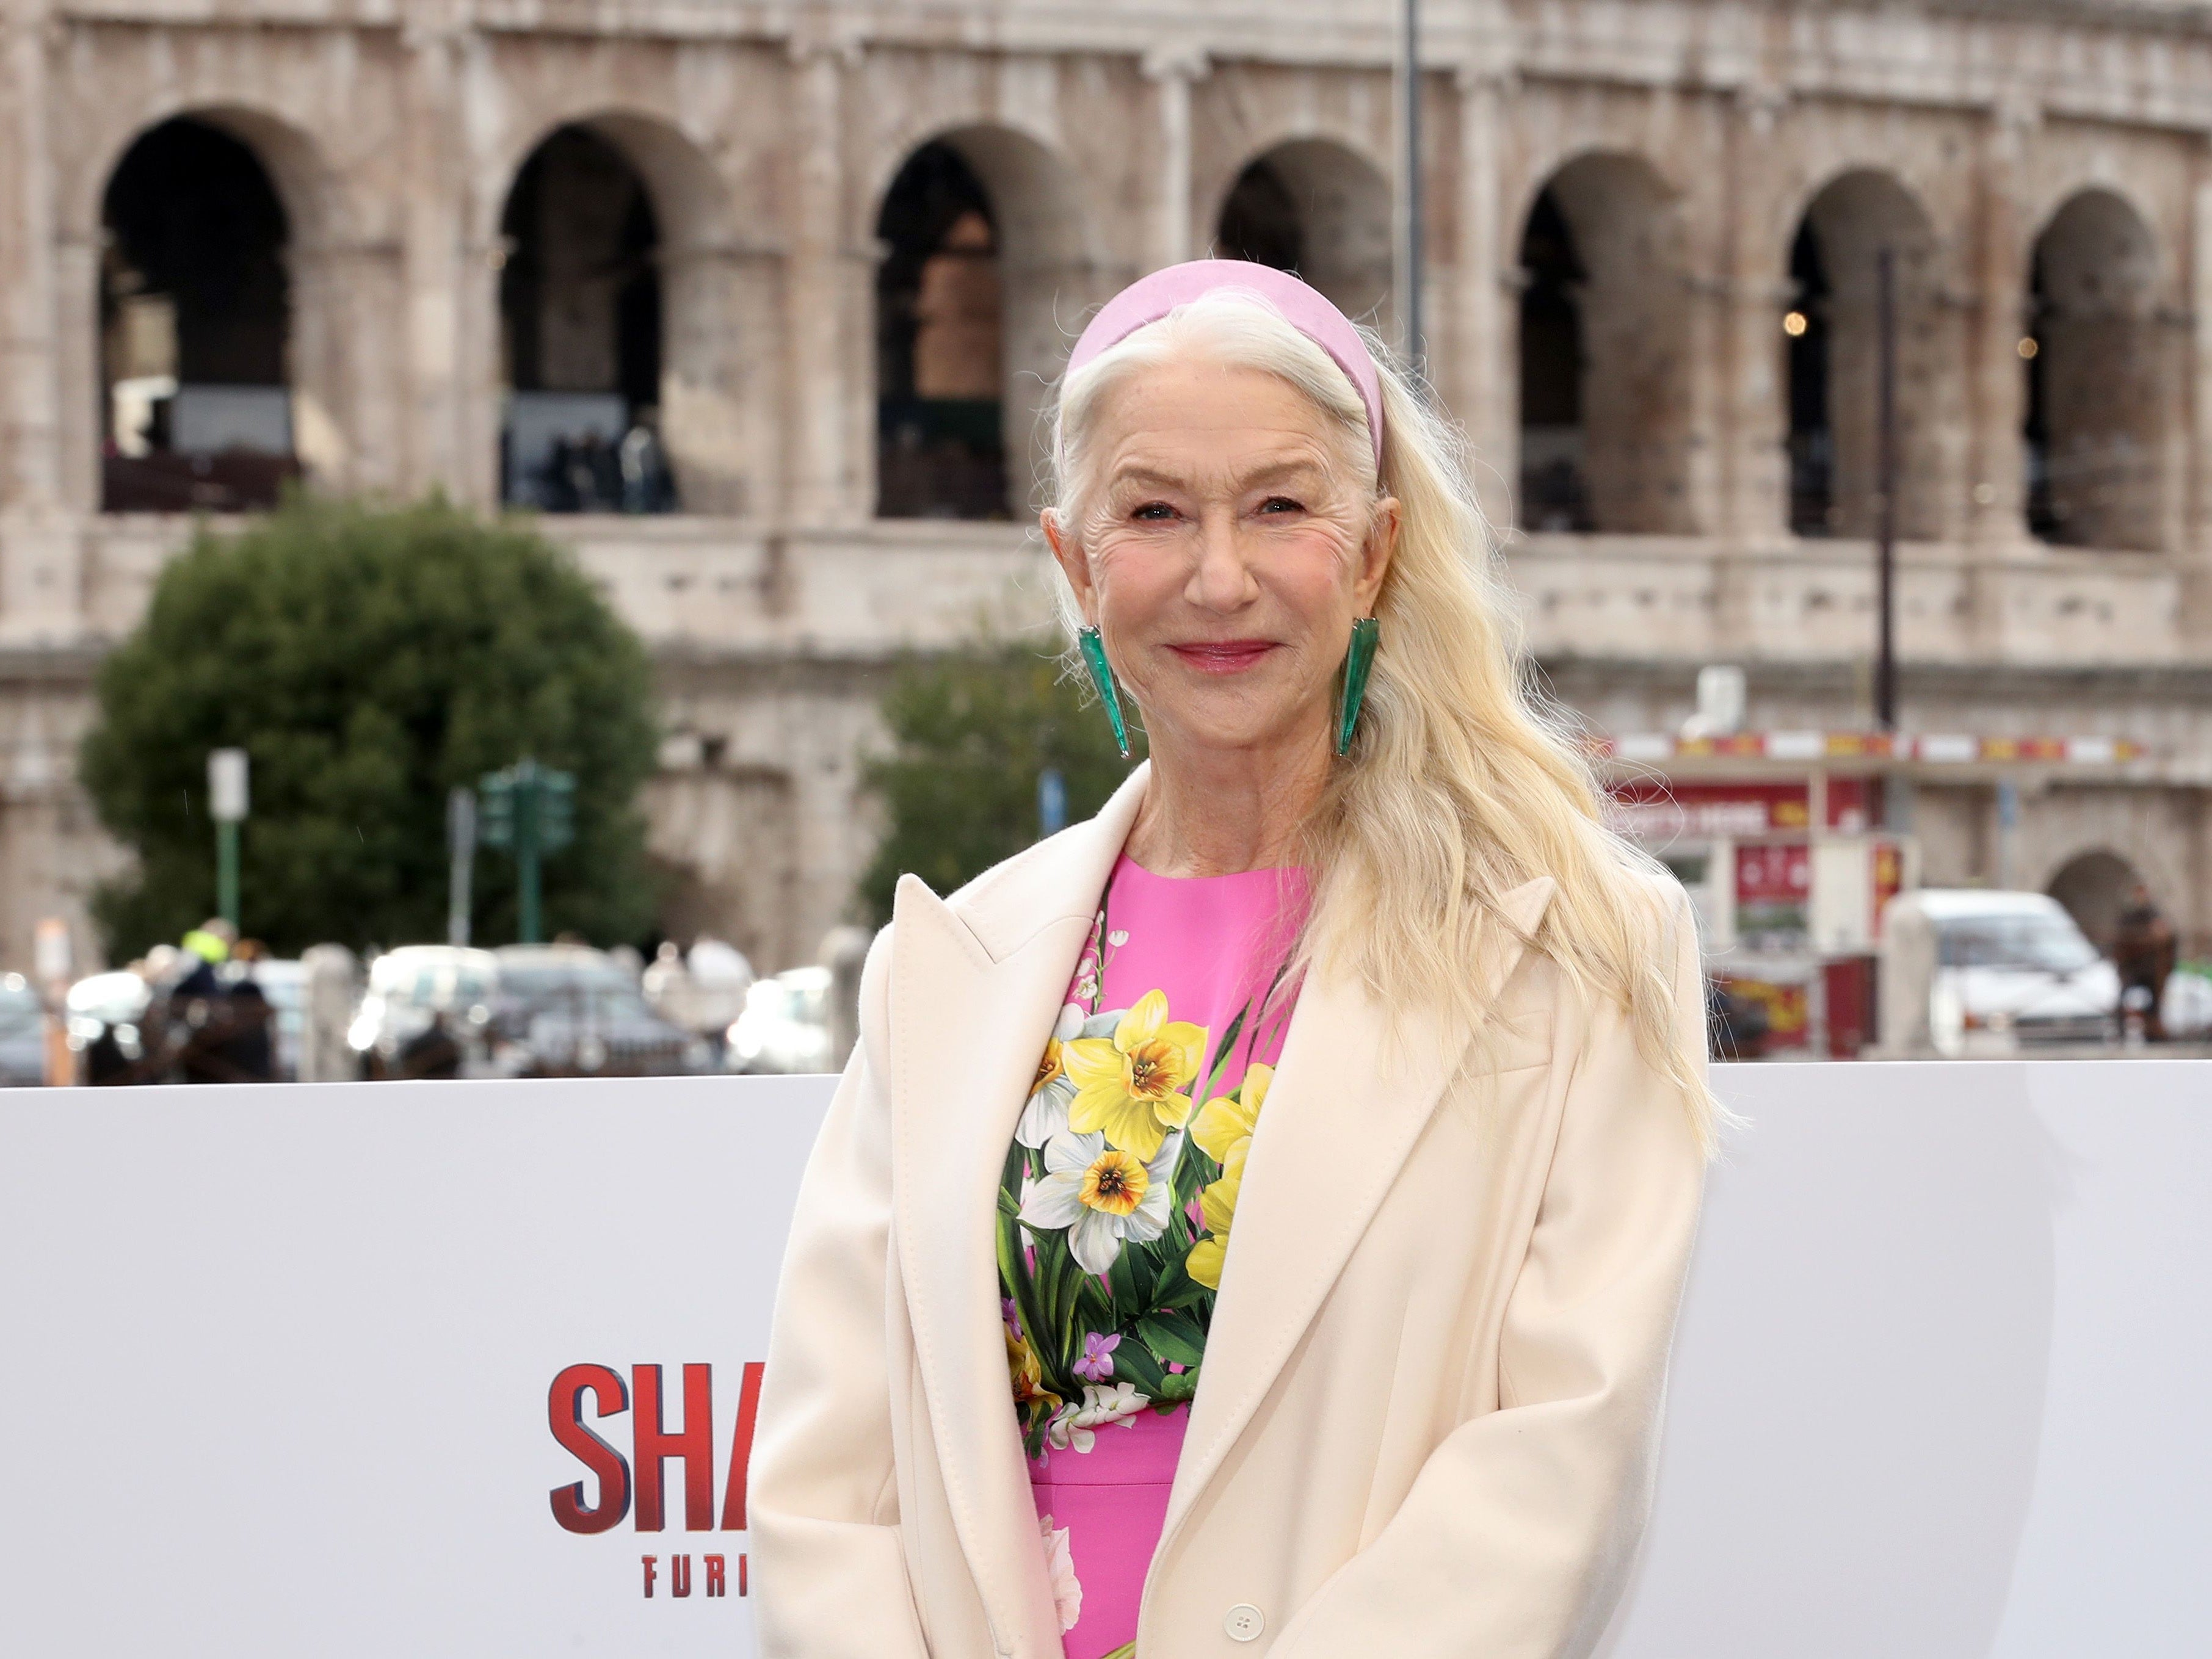 Helen Mirren attends the photocall for "Shazam! Fury Of The Gods" at Palazzo Manfredi on March 02, 2023 in Rome